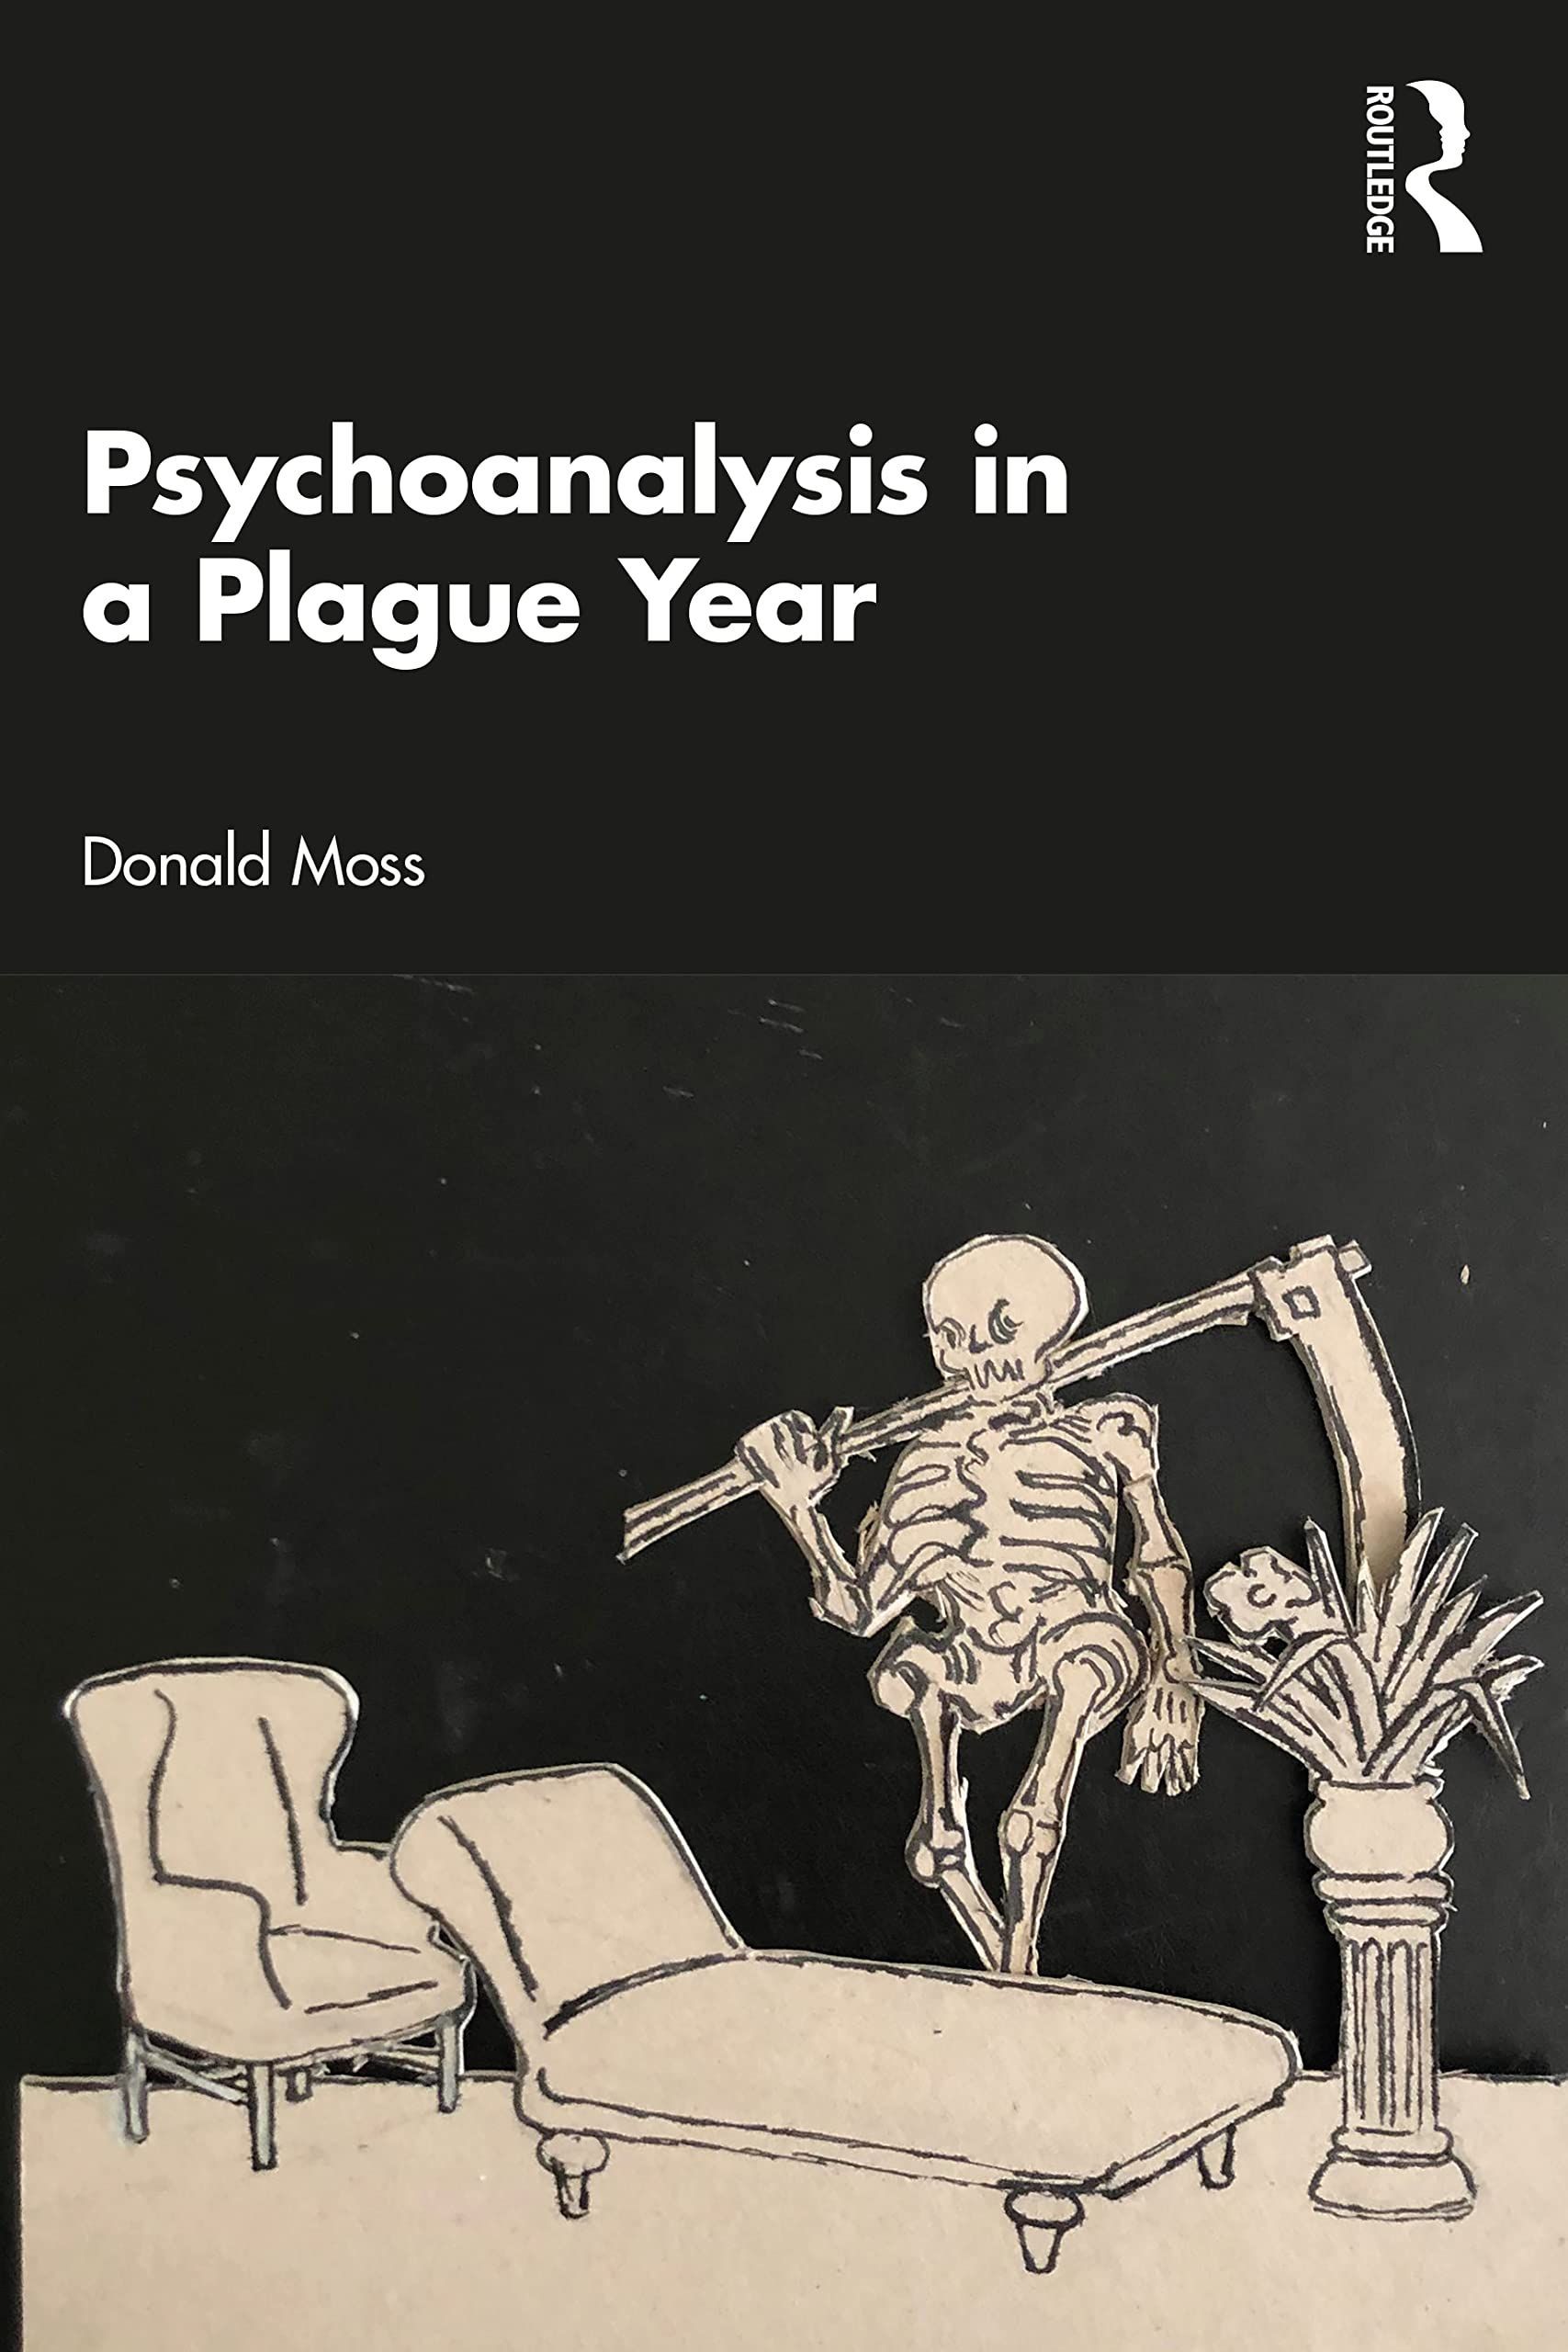 Psychic Frictions: On Donald Moss’s “Psychoanalysis in a Plague Year” and Sharon Kivland’s “Abécédaire”